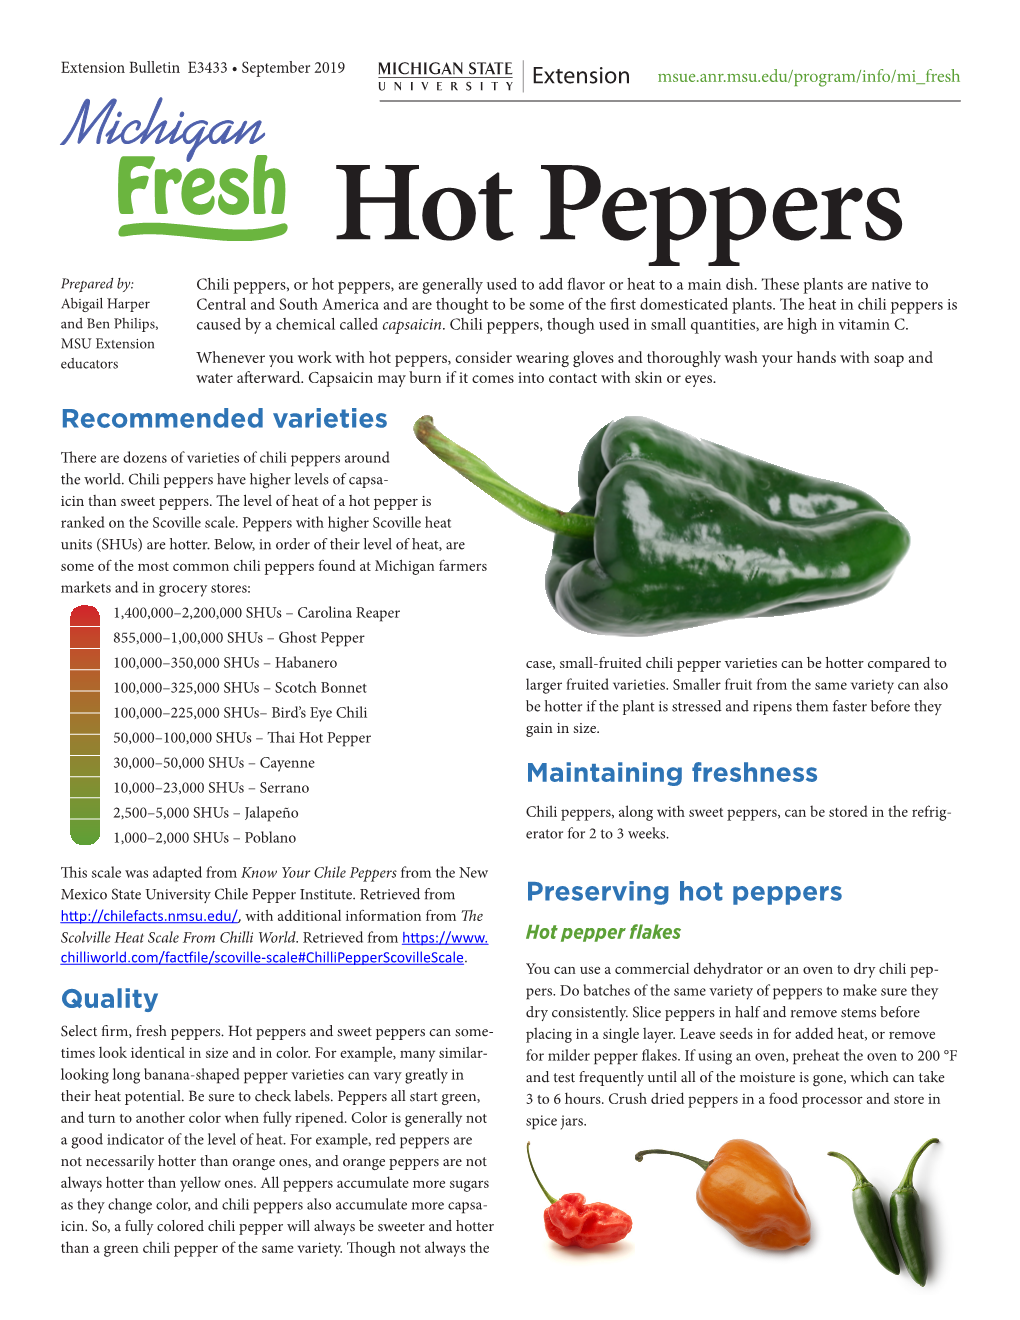 Hot Peppers Prepared By: Chili Peppers, Or Hot Peppers, Are Generally Used to Add Flavor Or Heat to a Main Dish